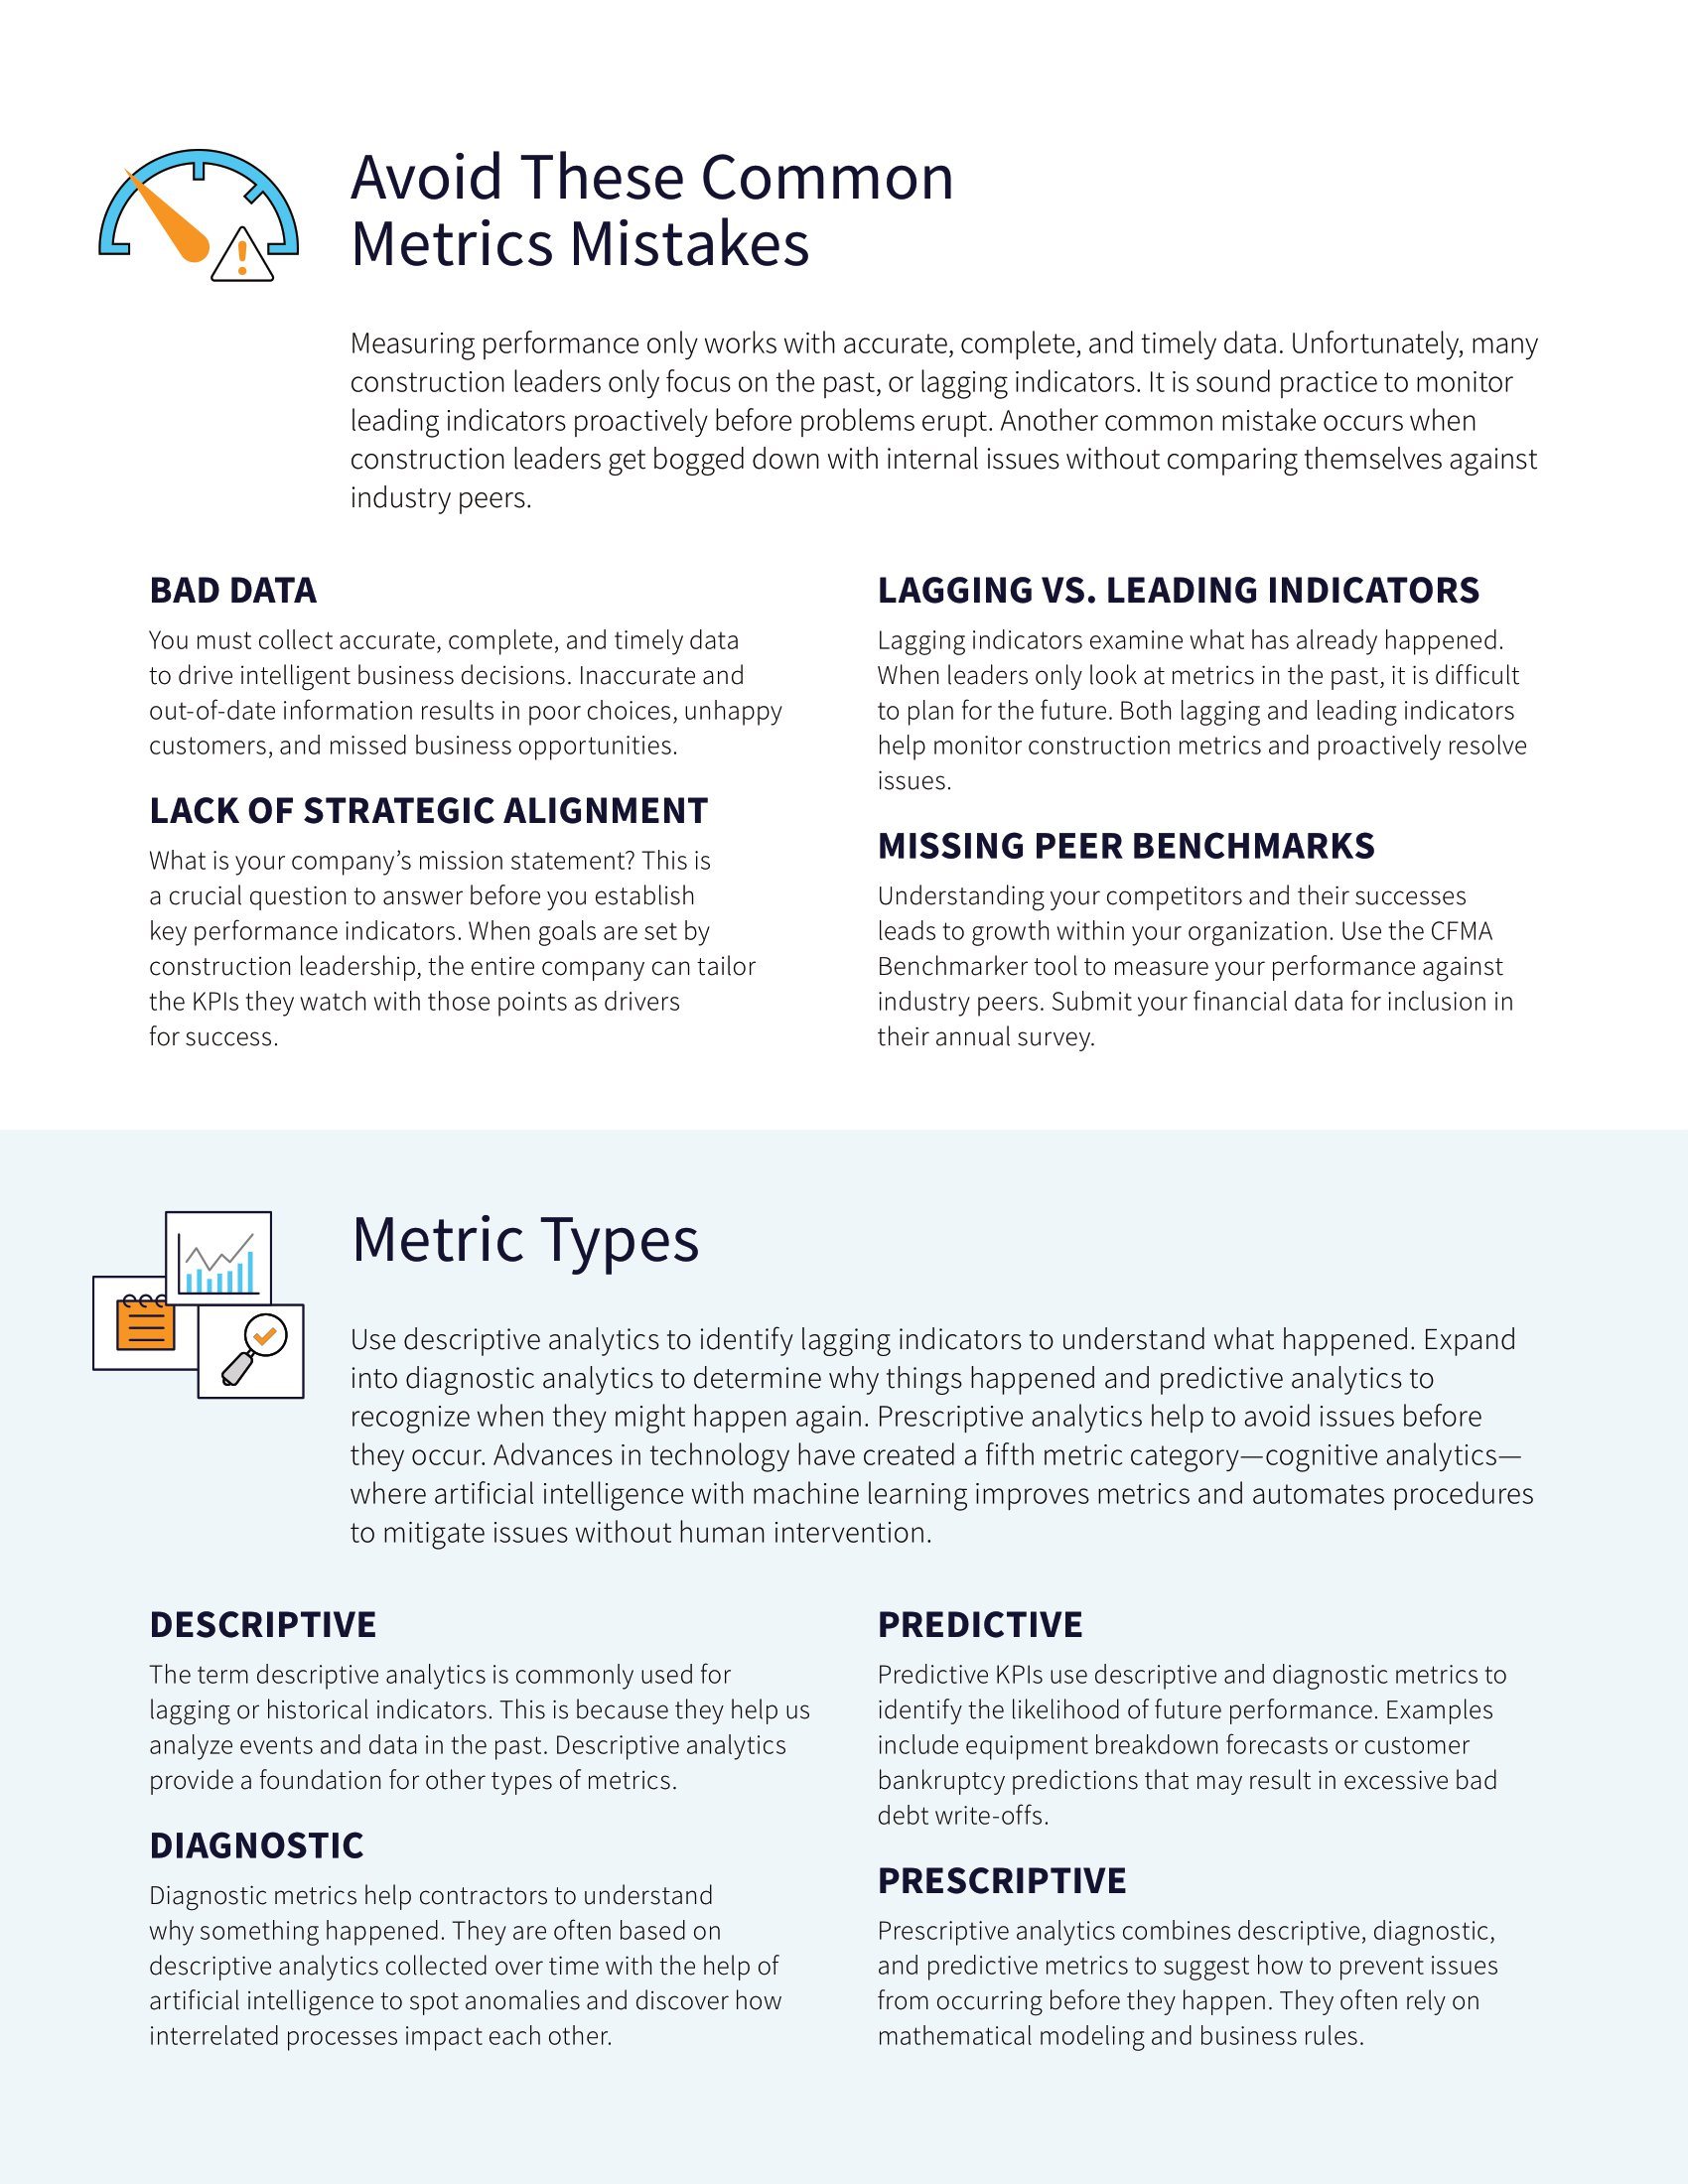 Measurable Growth Begins with Measuring the Right Construction Metrics, page 2